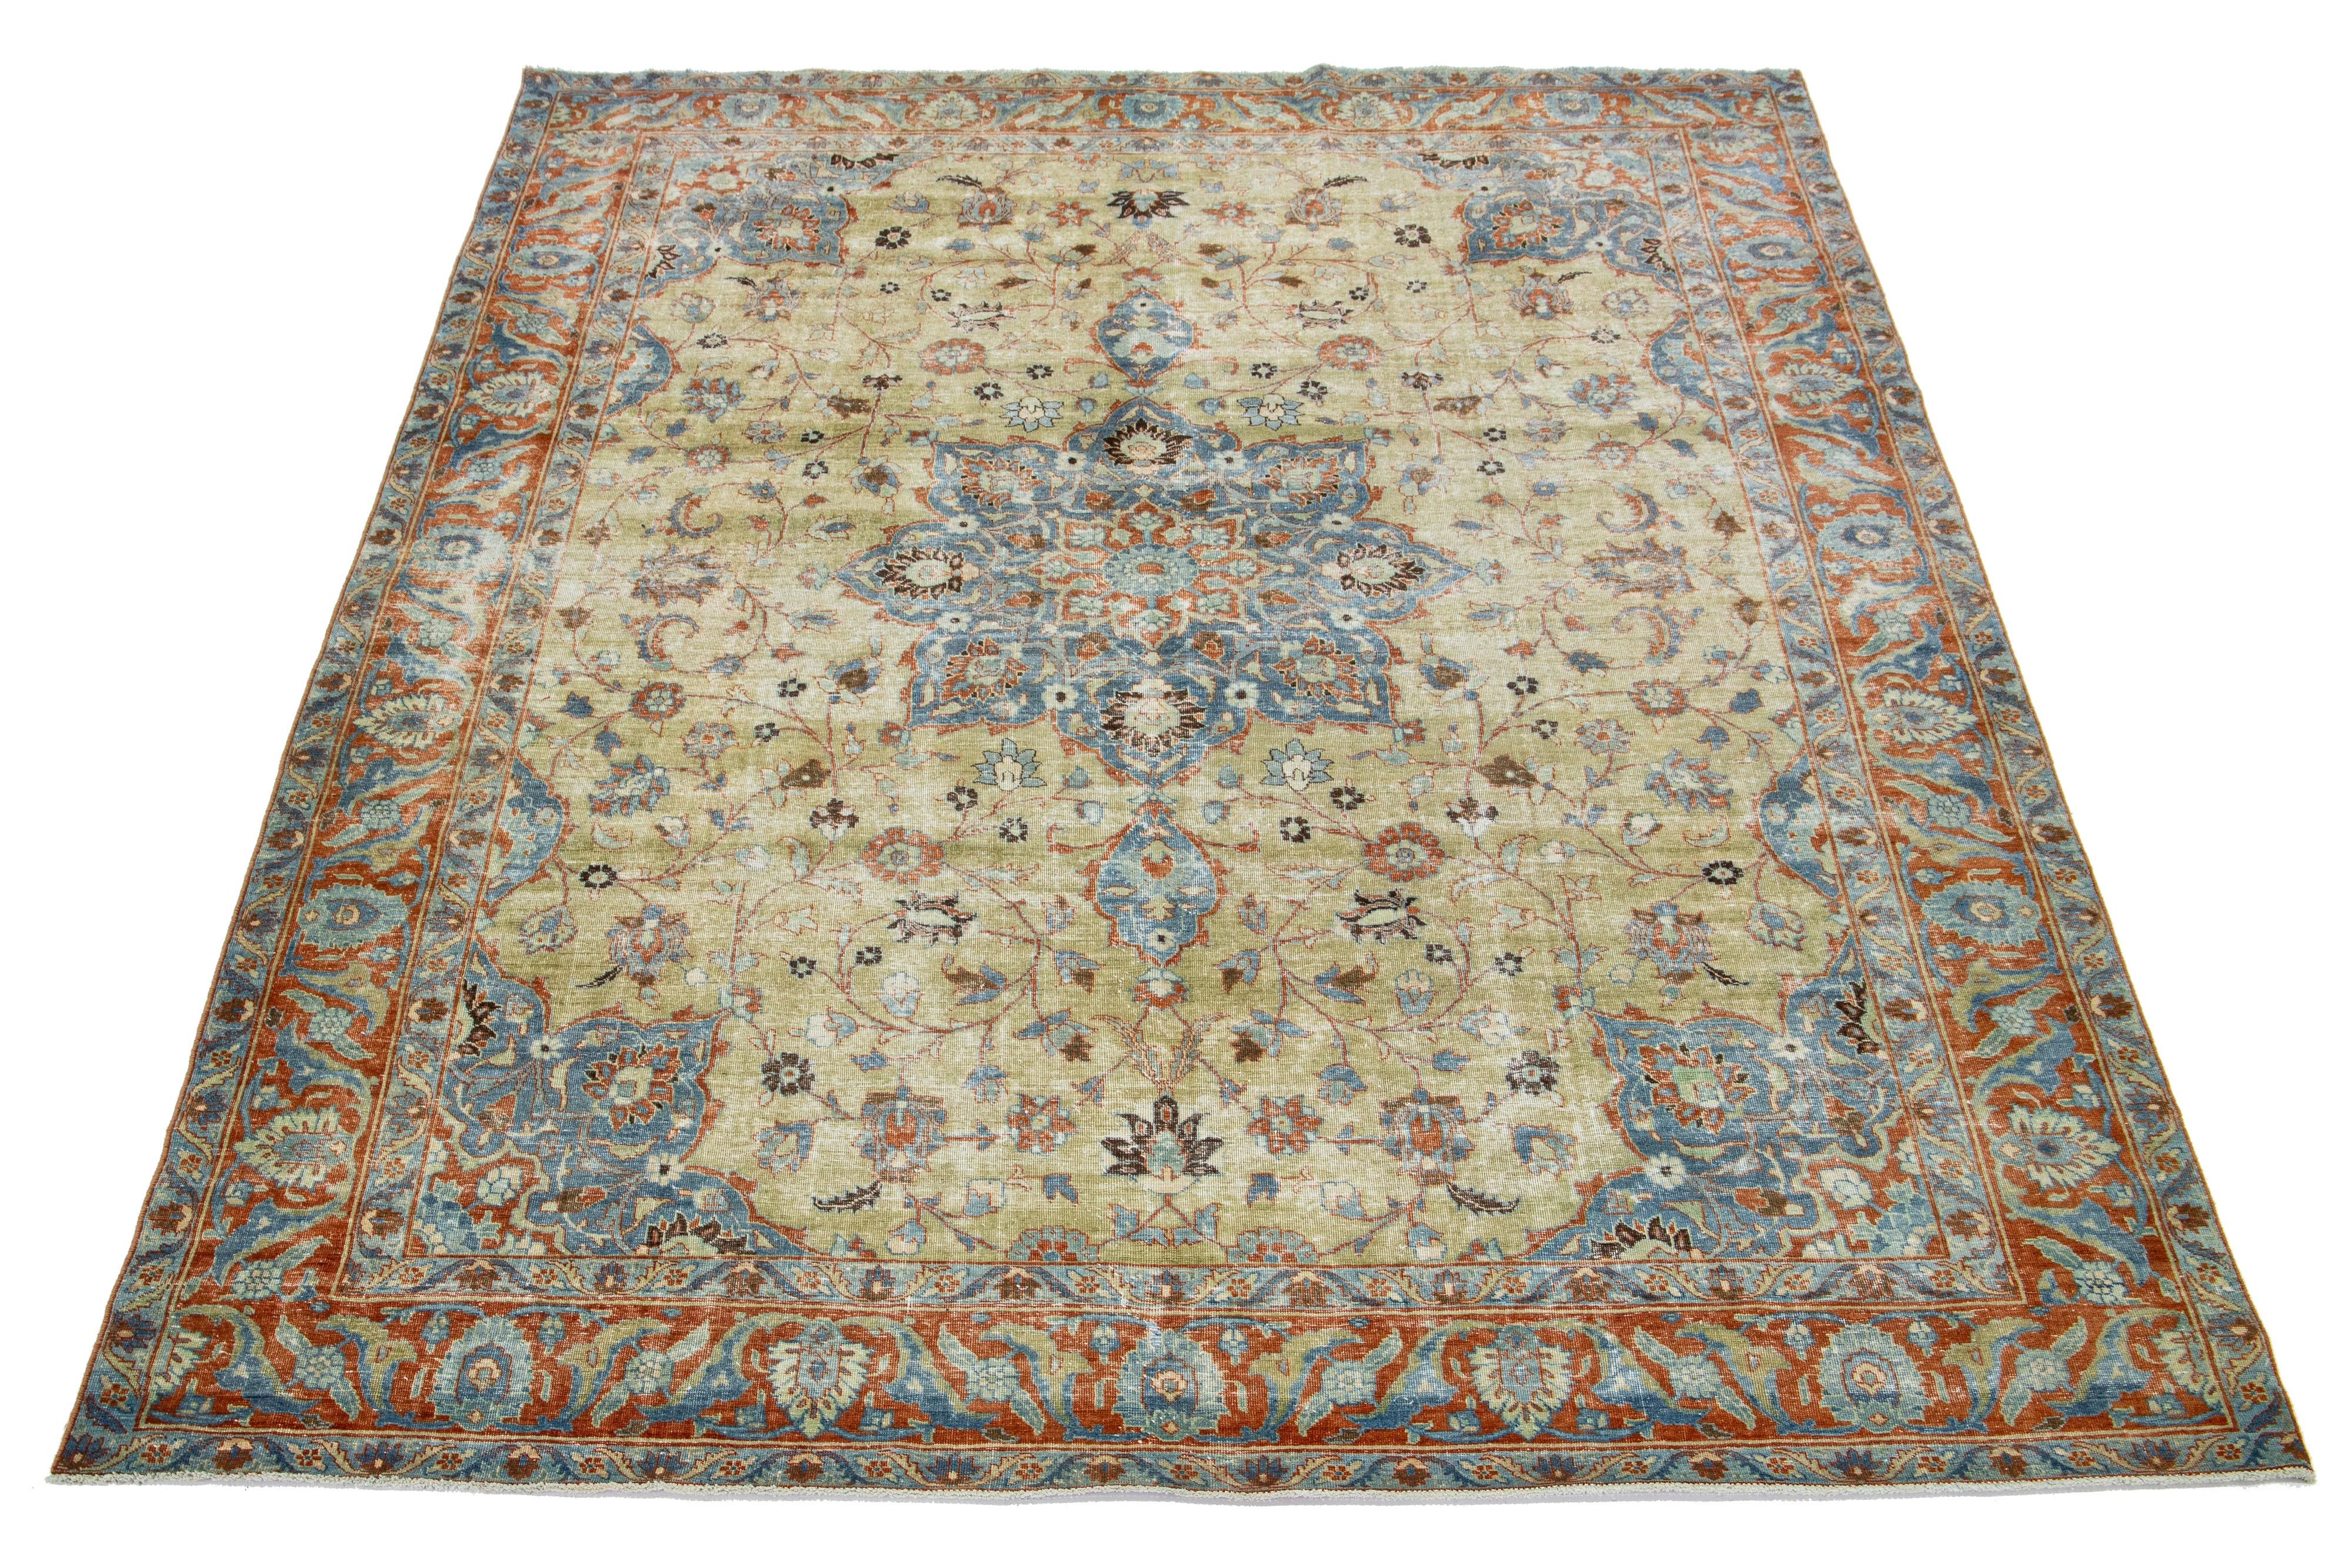 This beautifully handcrafted Persian Tabriz wool rug displays a classic floral pattern. The contrast created by the beige-tan background accentuates the medallion floral design, which features shades of blue and orange.

This rug measures  9'3